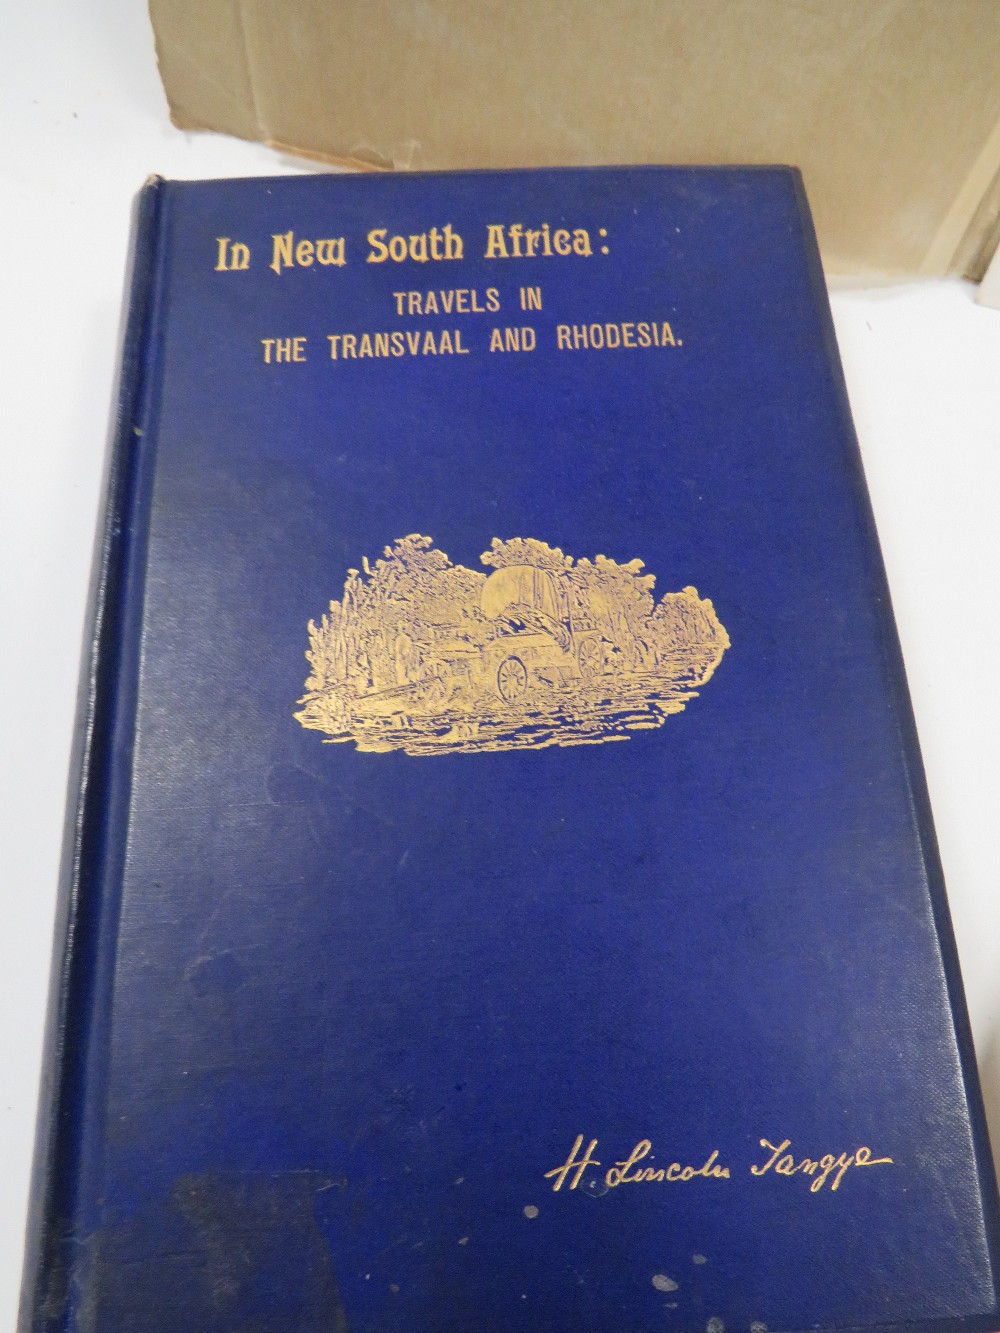 FIRST EDITION 'IN NEW SOUTH AFRICA, TRAVELS IN THE TRANSVAAL RHODESIA BY H. LINCOLN TANGYE 1896 WITH - Image 6 of 7